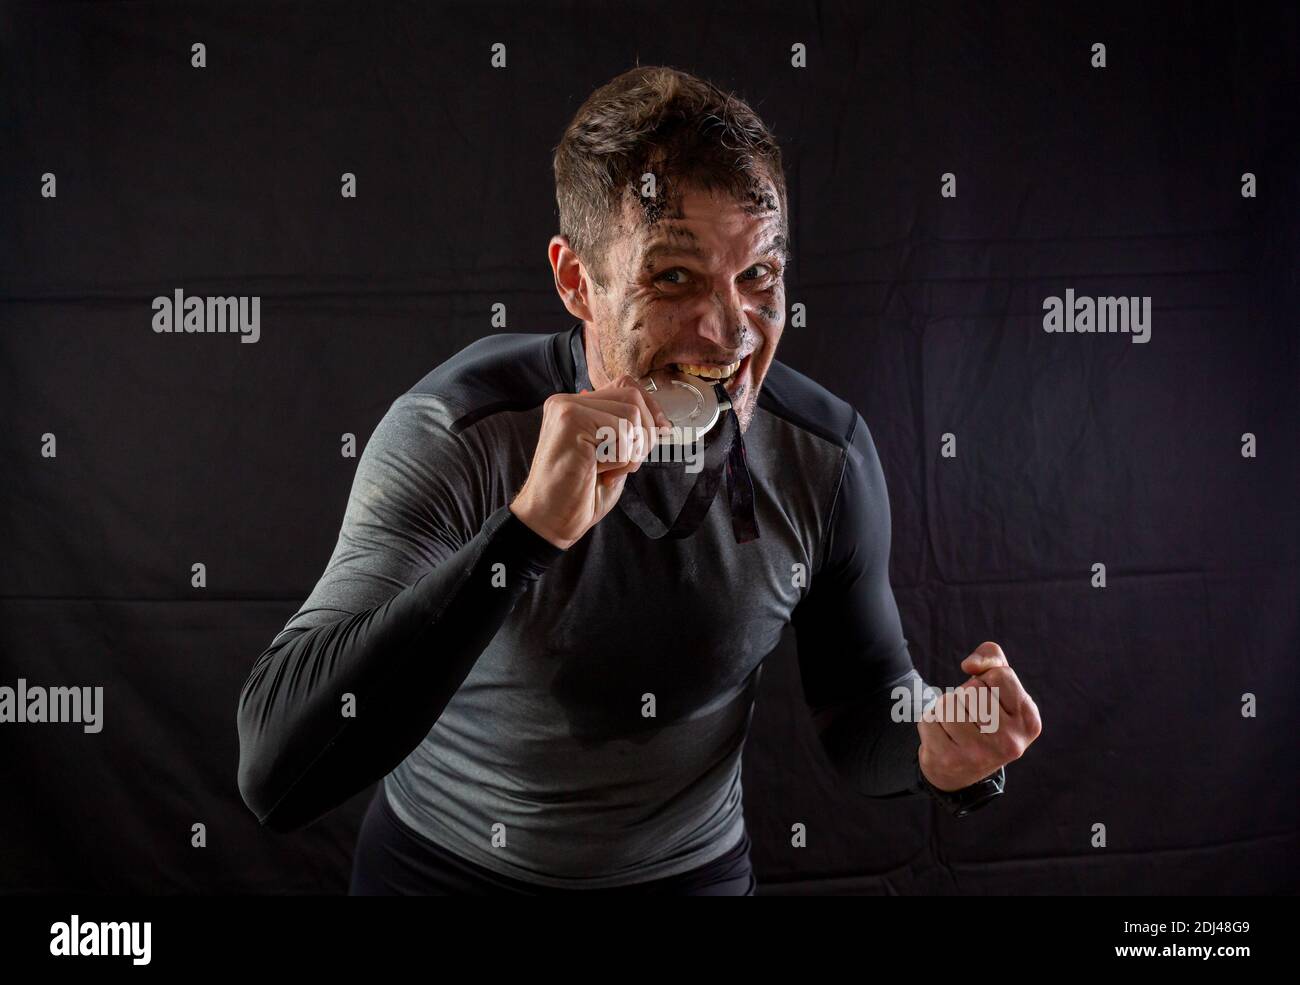 Handsome man in sportswear is insanely rejoicing at the received silver medal in the studio on a black background Stock Photo